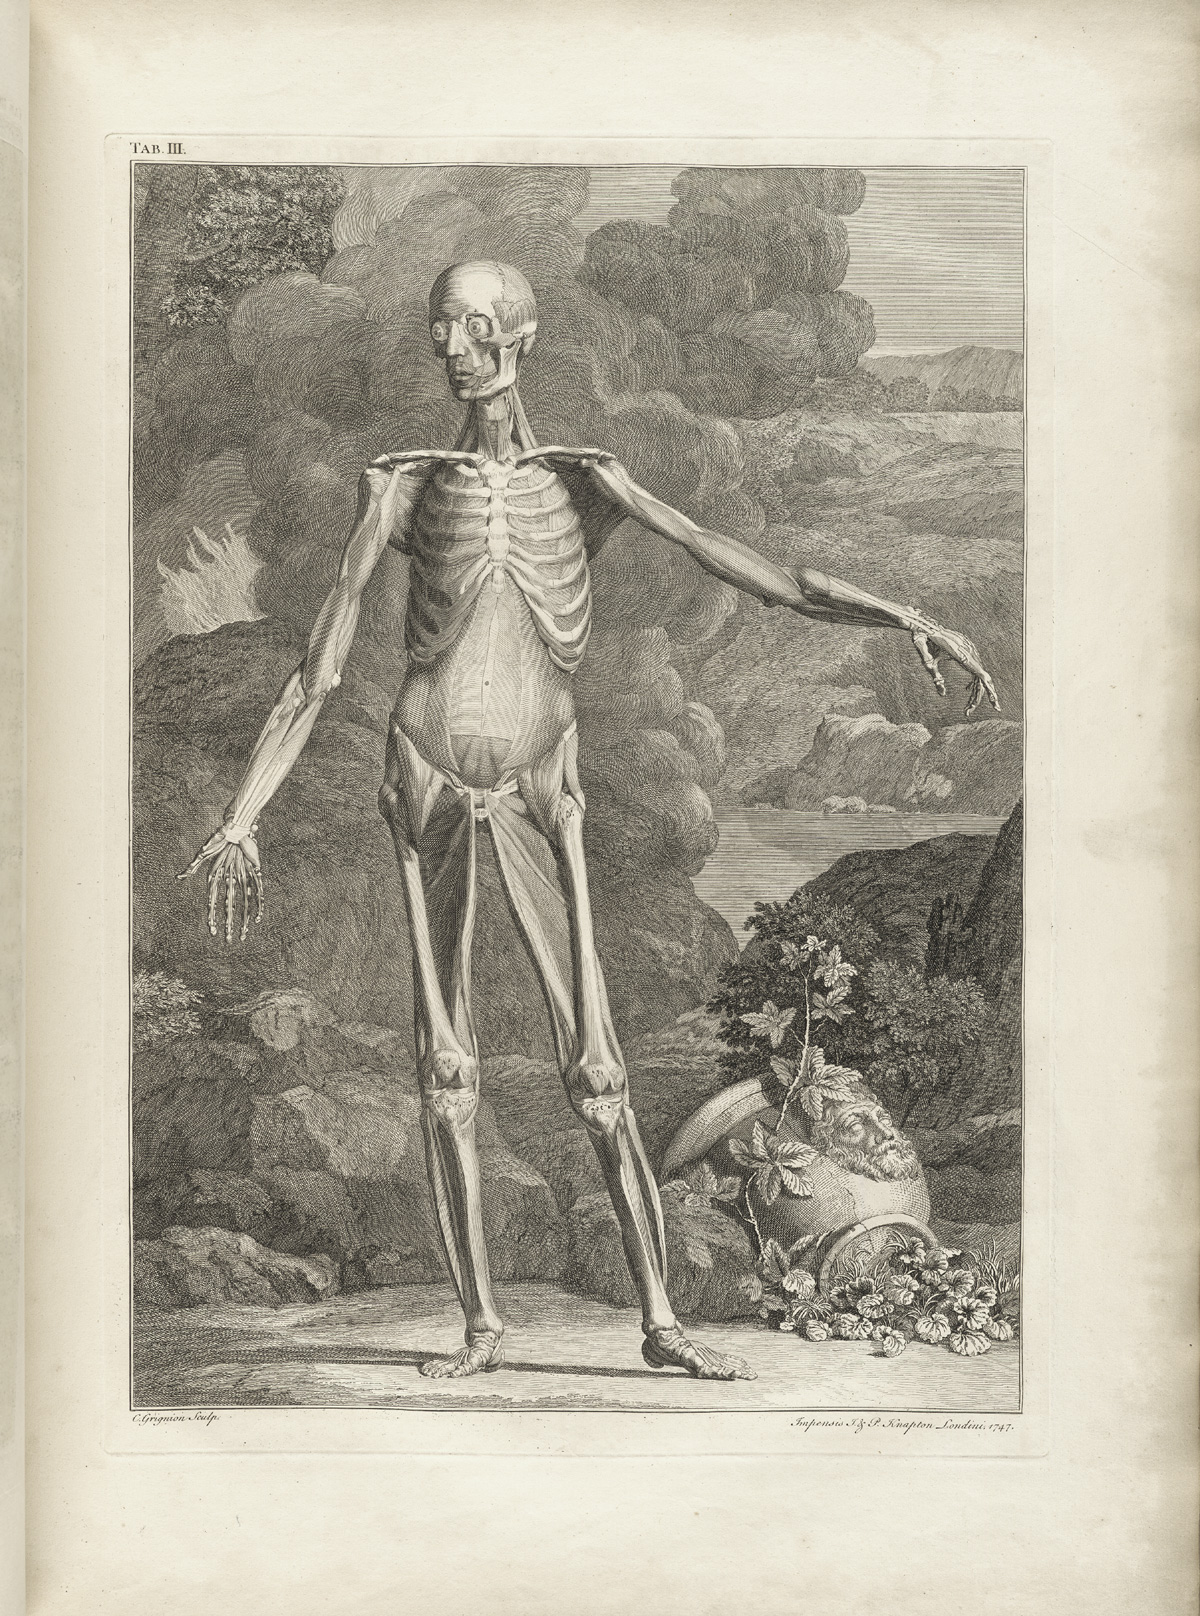 Table 3a of Bernhard Siegfried Albinus' Tabulae sceleti et musculorum corporis humani, featuring a full length frontal view of a flayed corpse in a landscape with its left arm is extended.